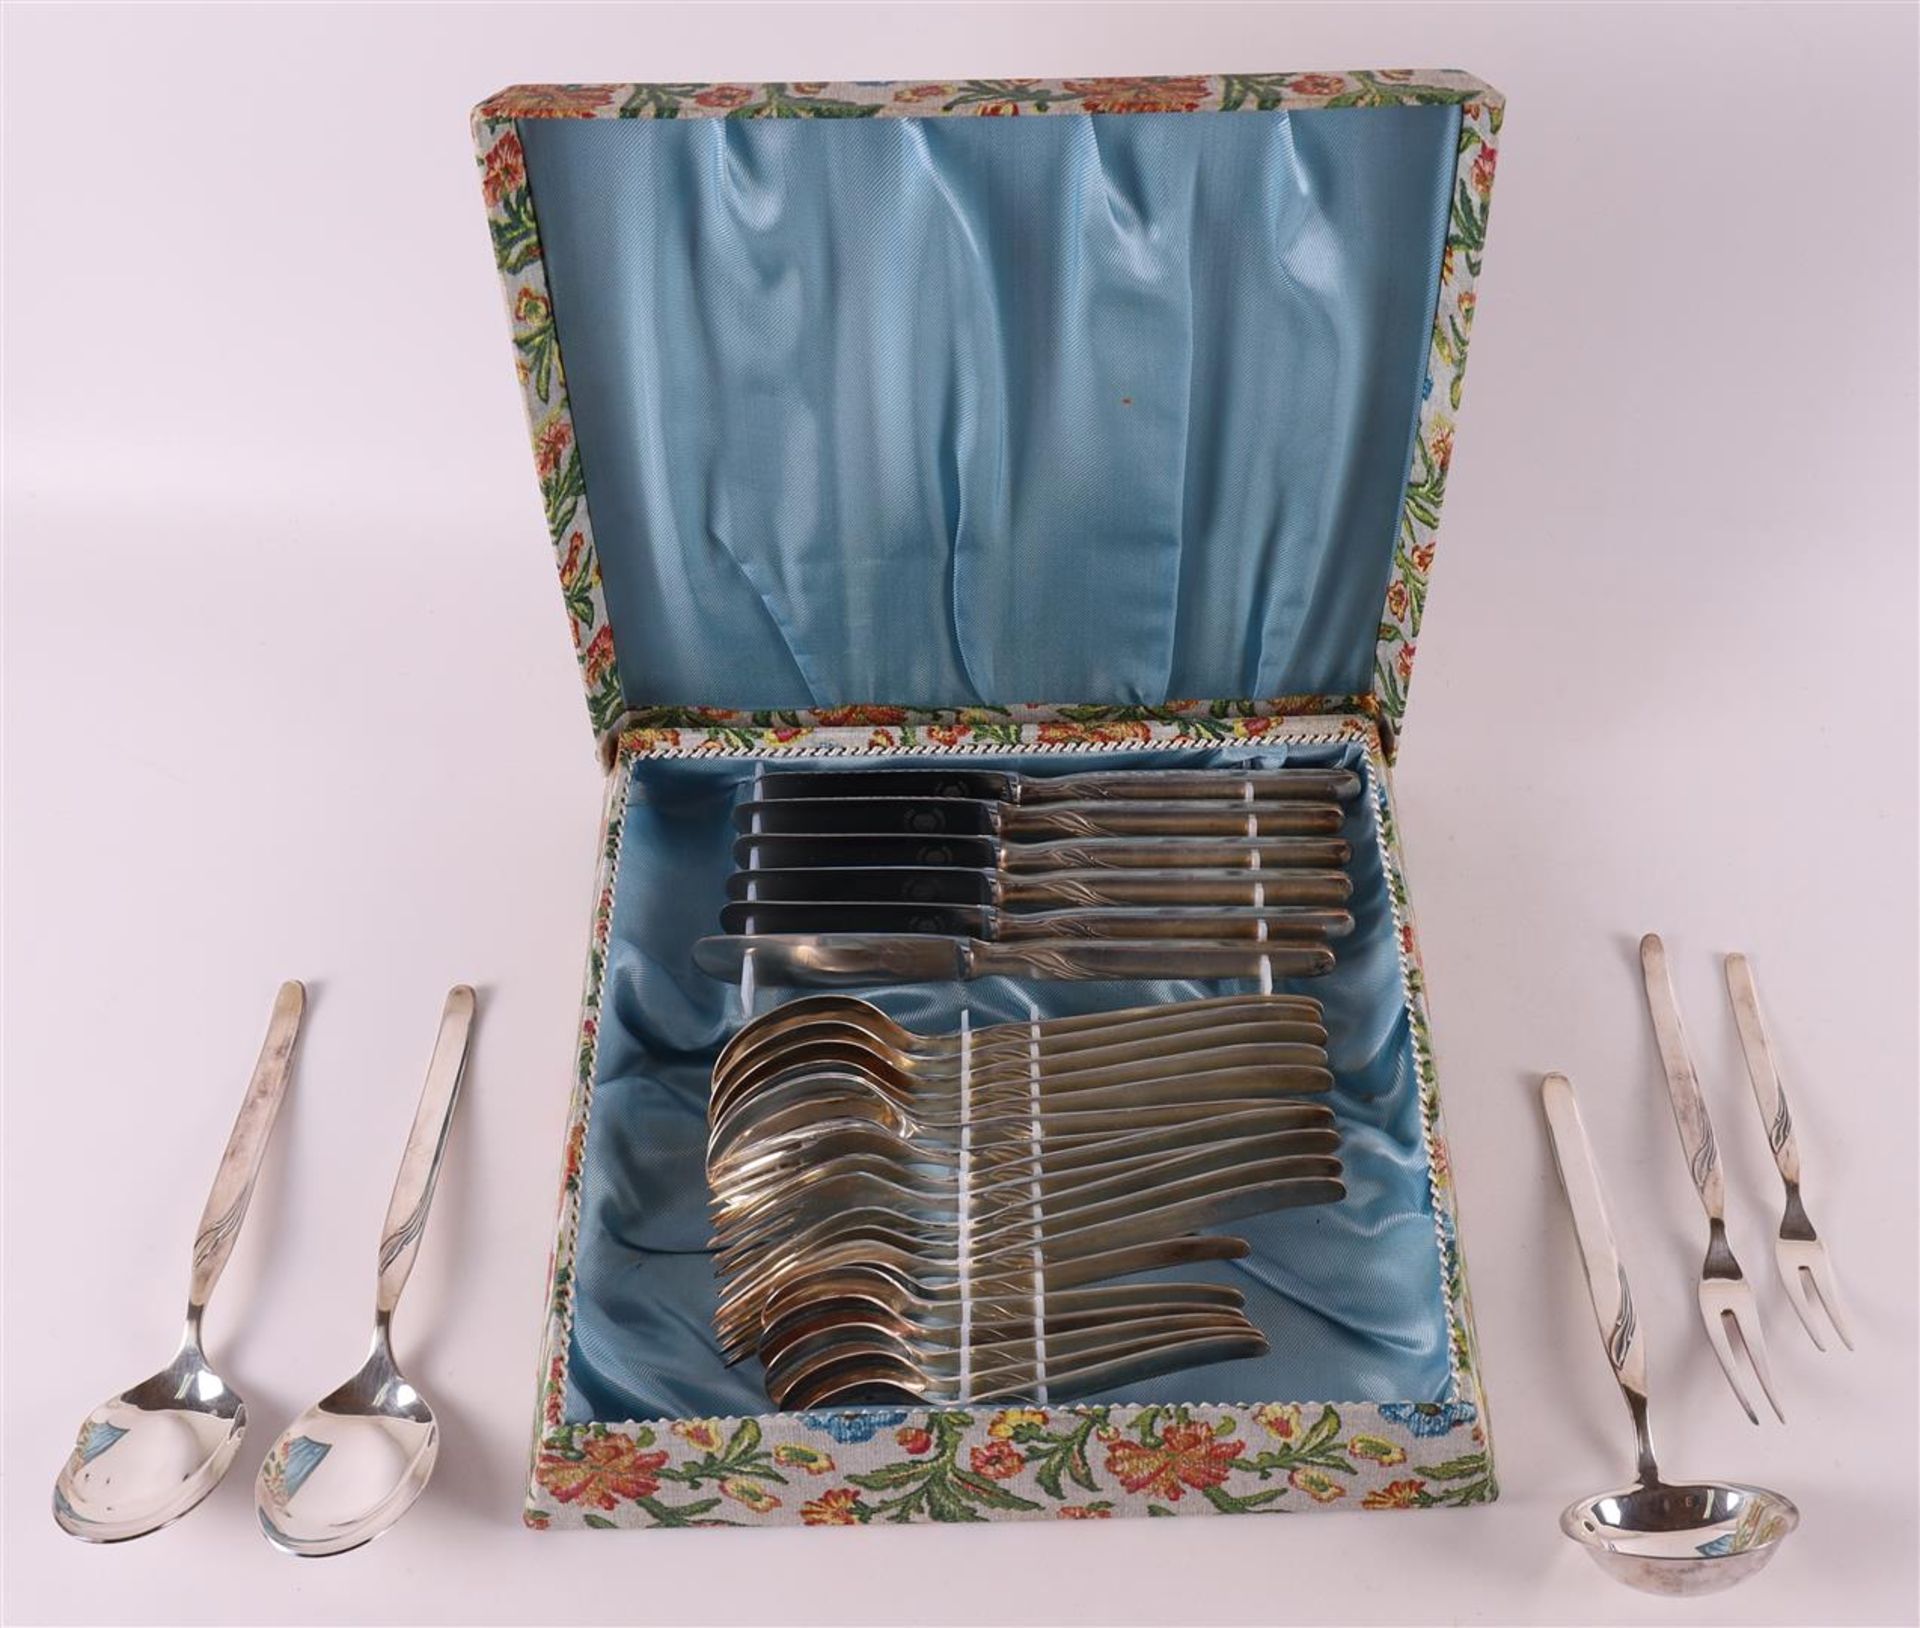 A silver plated cutlery set in cassette, Germany, Solingen, mid 20th century.